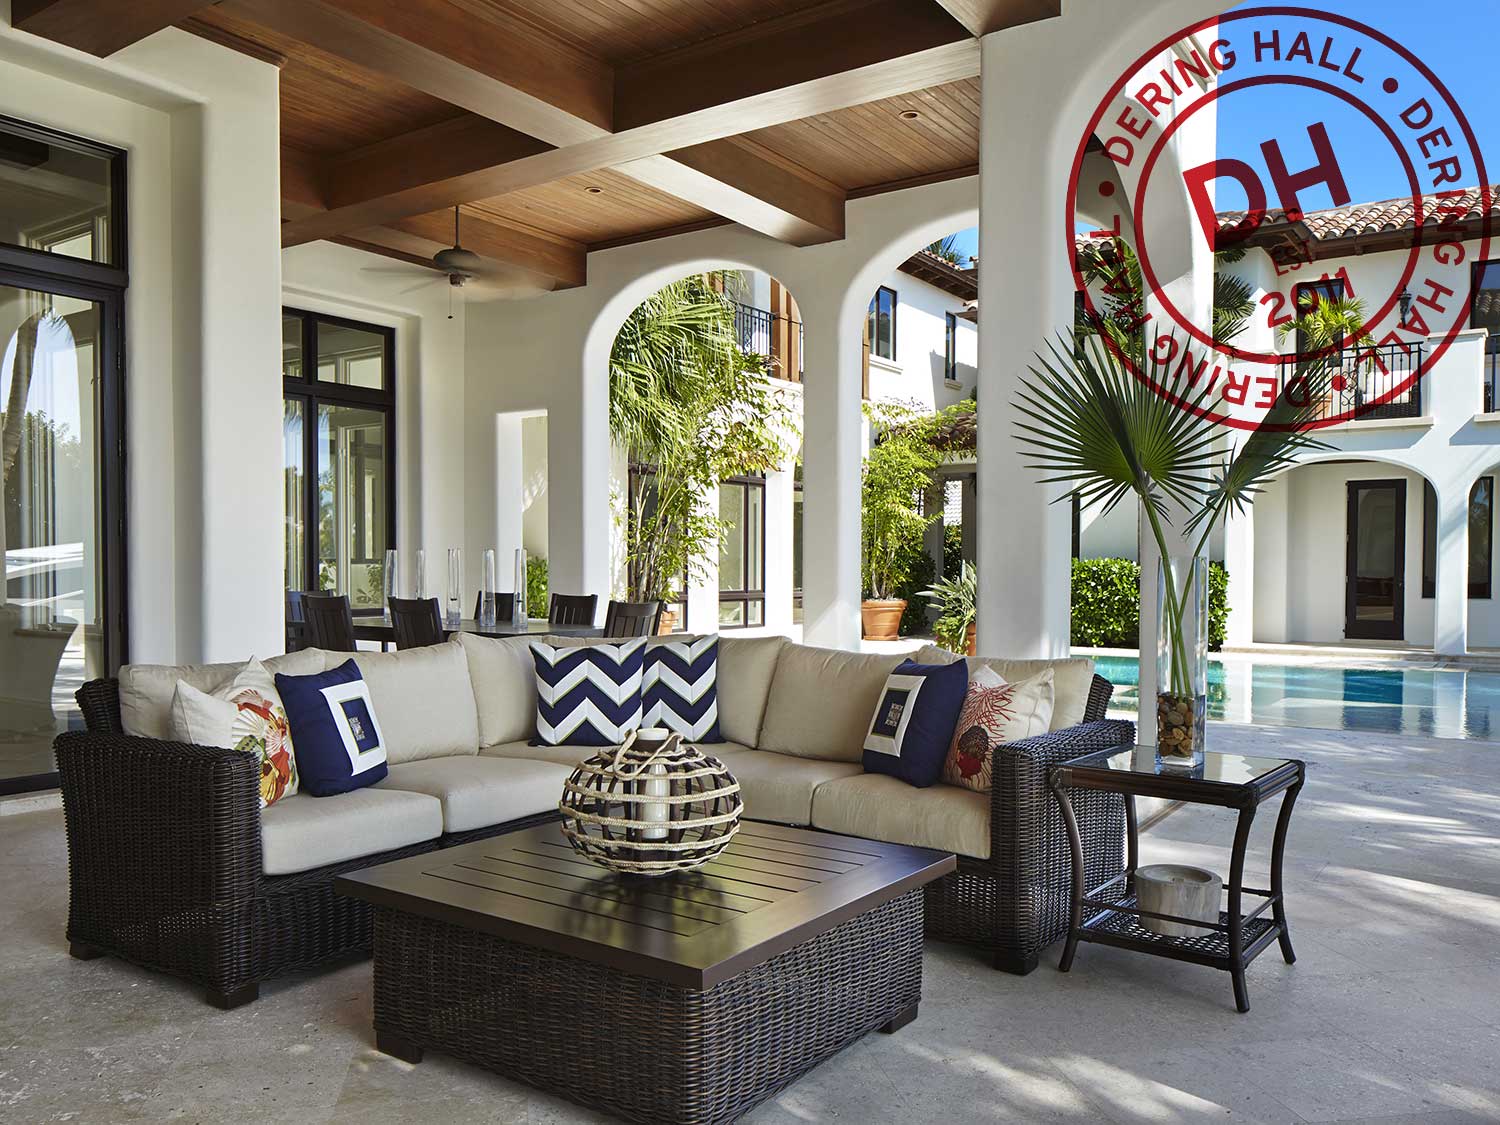 Derring Hall Outdoor Space with Ft Lauderdale Outdoor